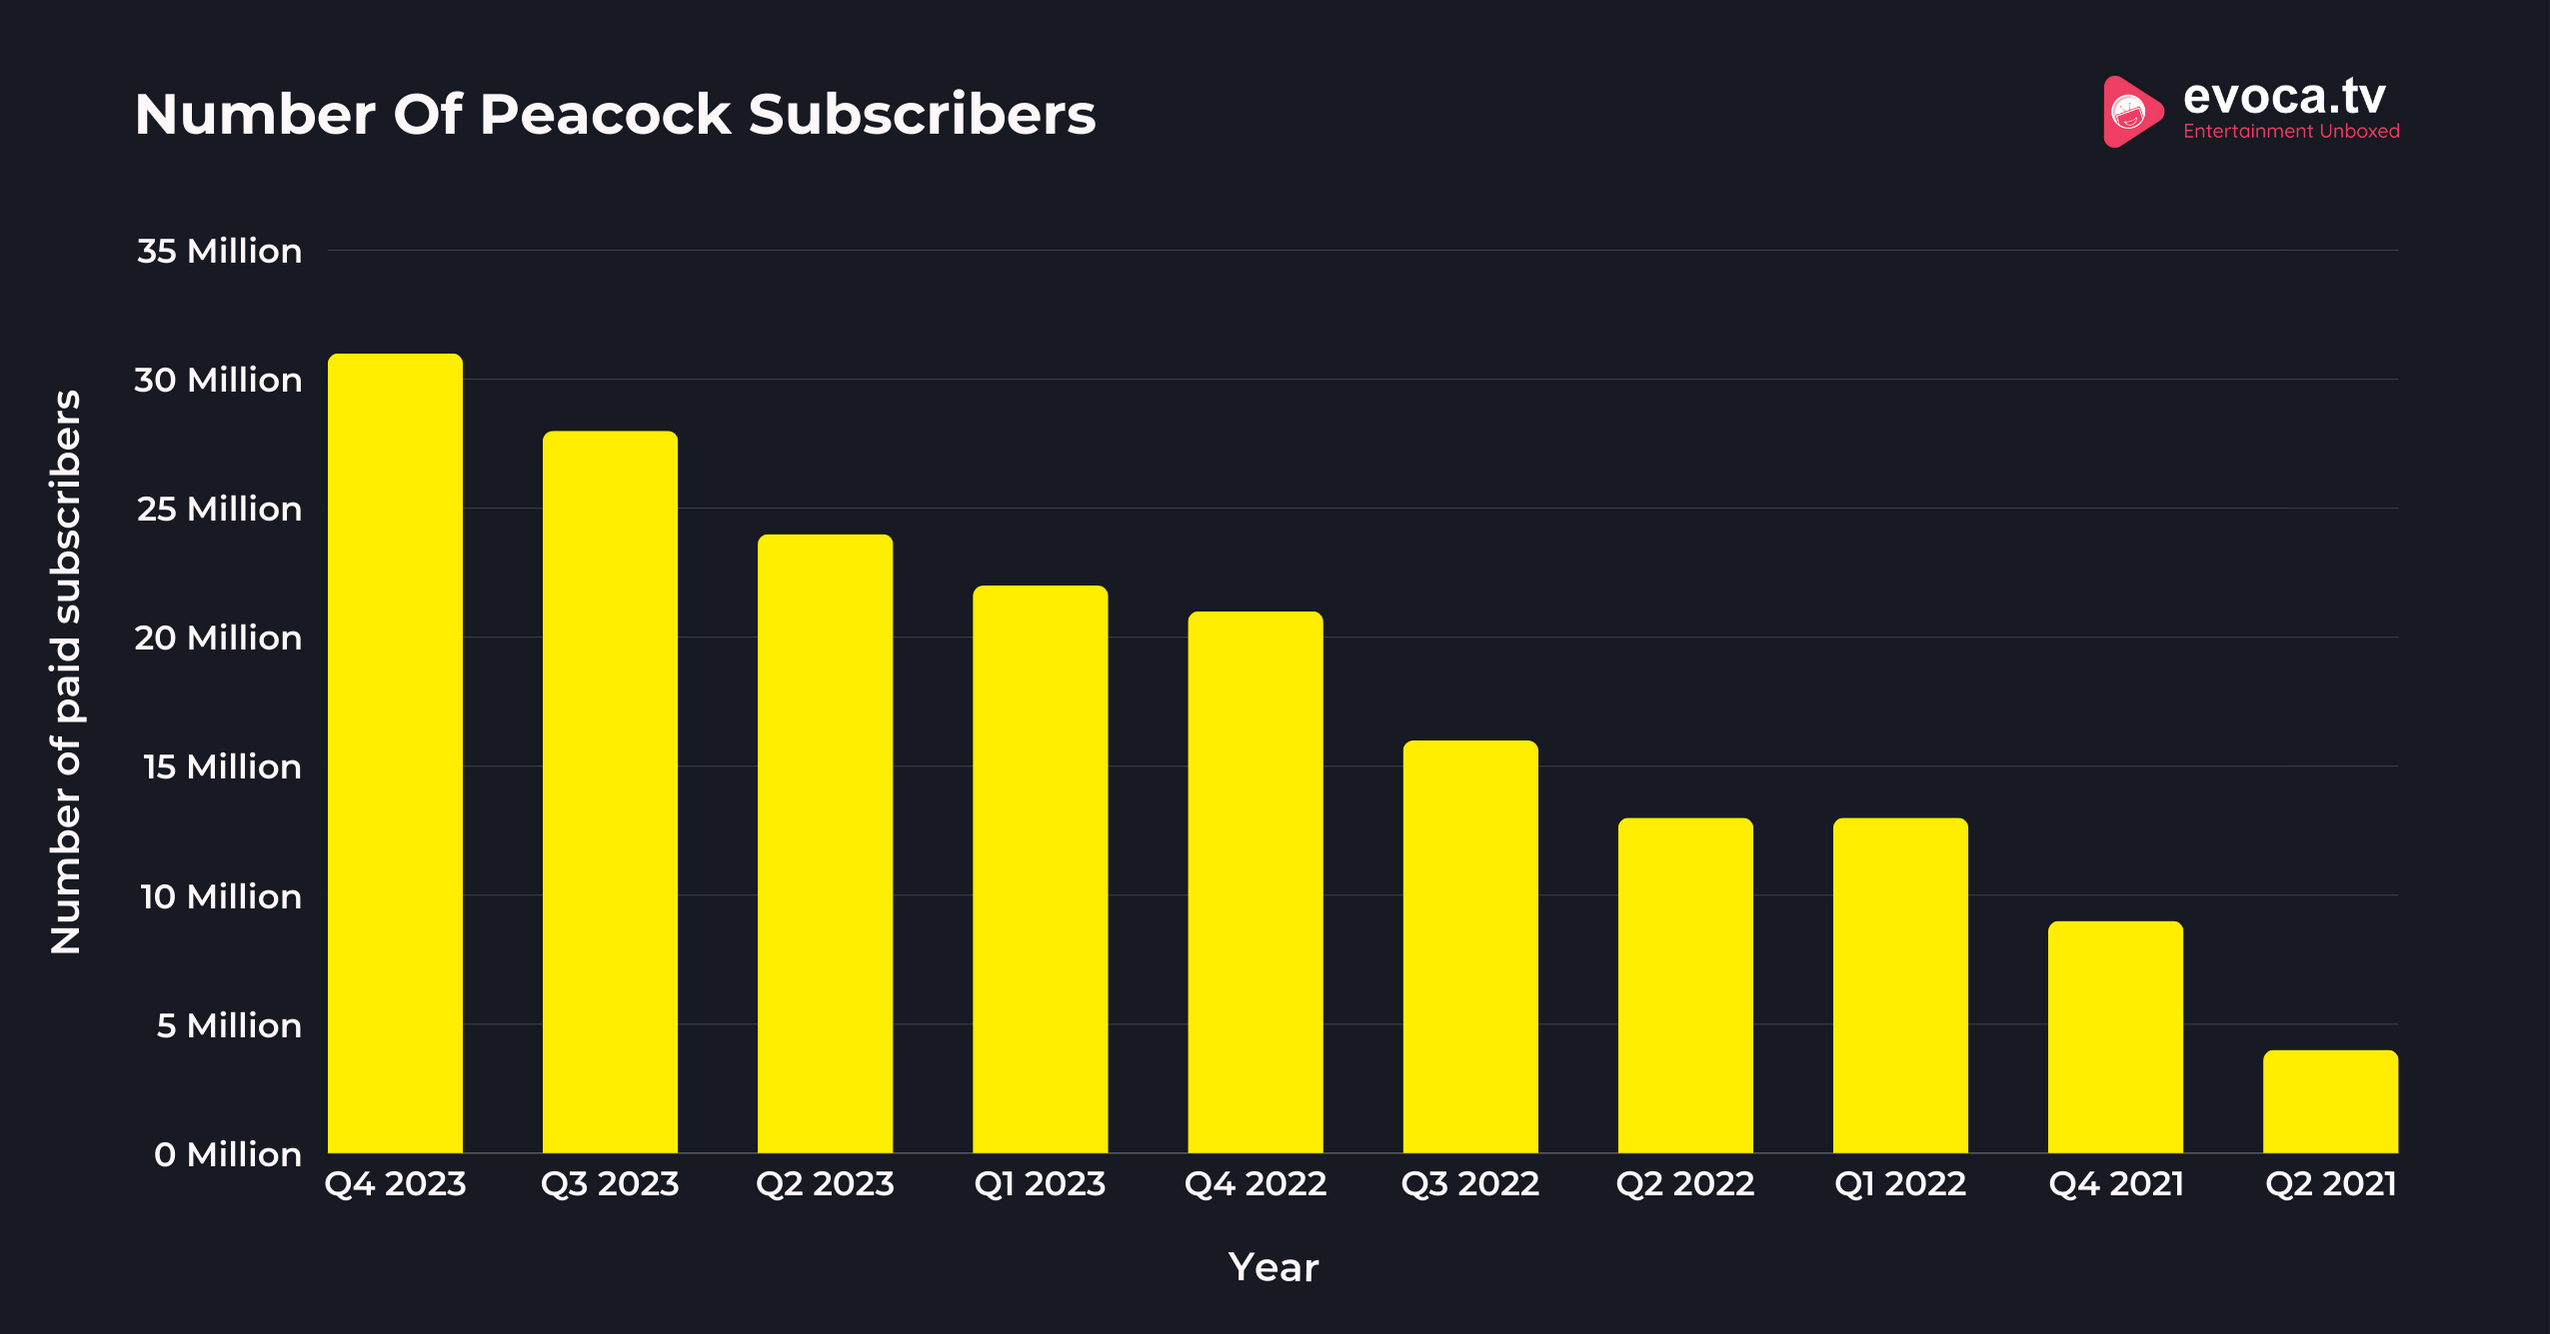 Number Of Peacock Subscribers